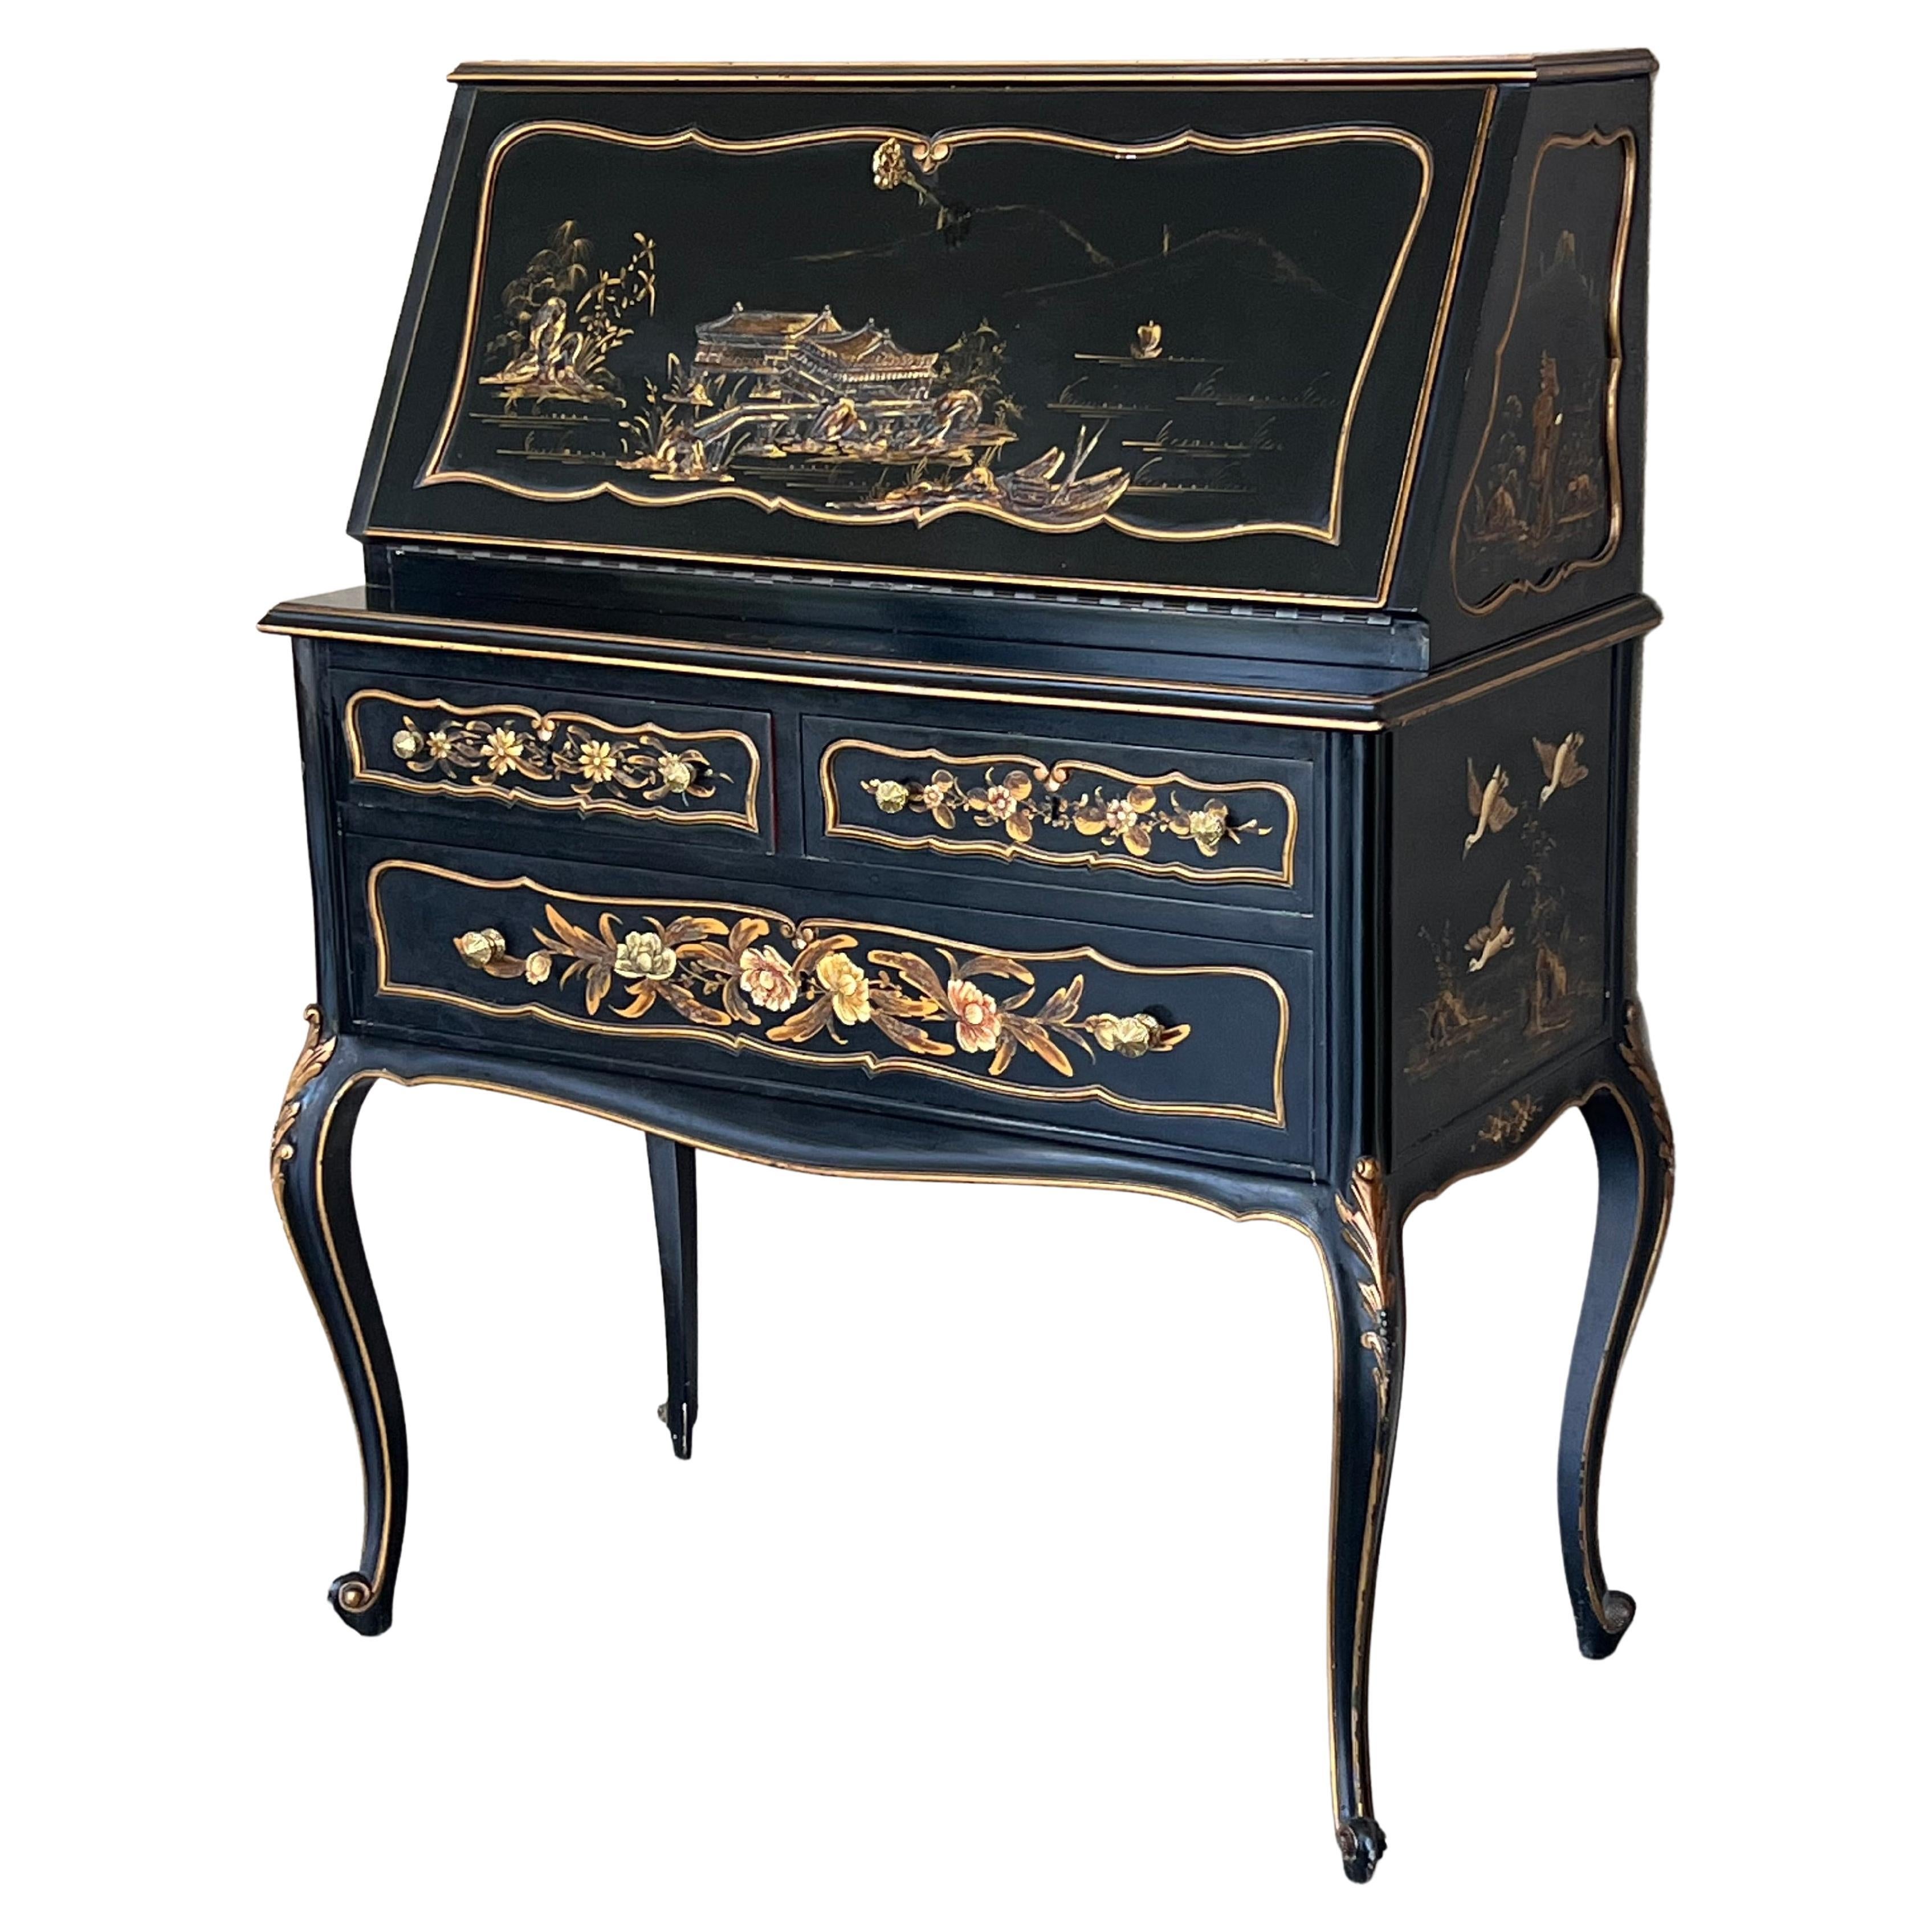 Chippendale Style Slant Top Desk in Black Lacquered Wood, circa 1900